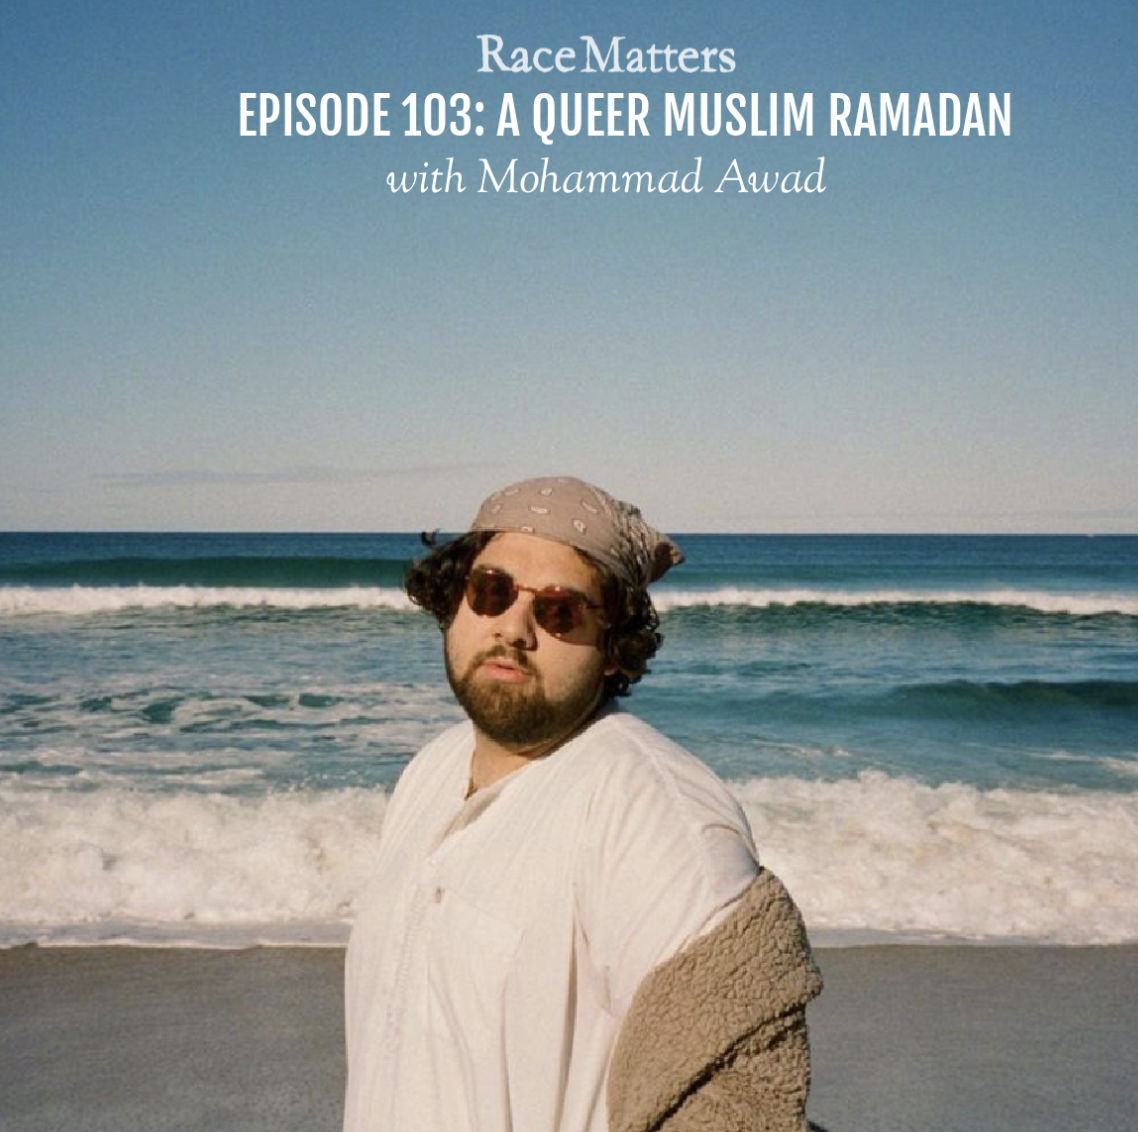 Episode 103: A Queer Muslim Ramadan (with Mohammad Awad)